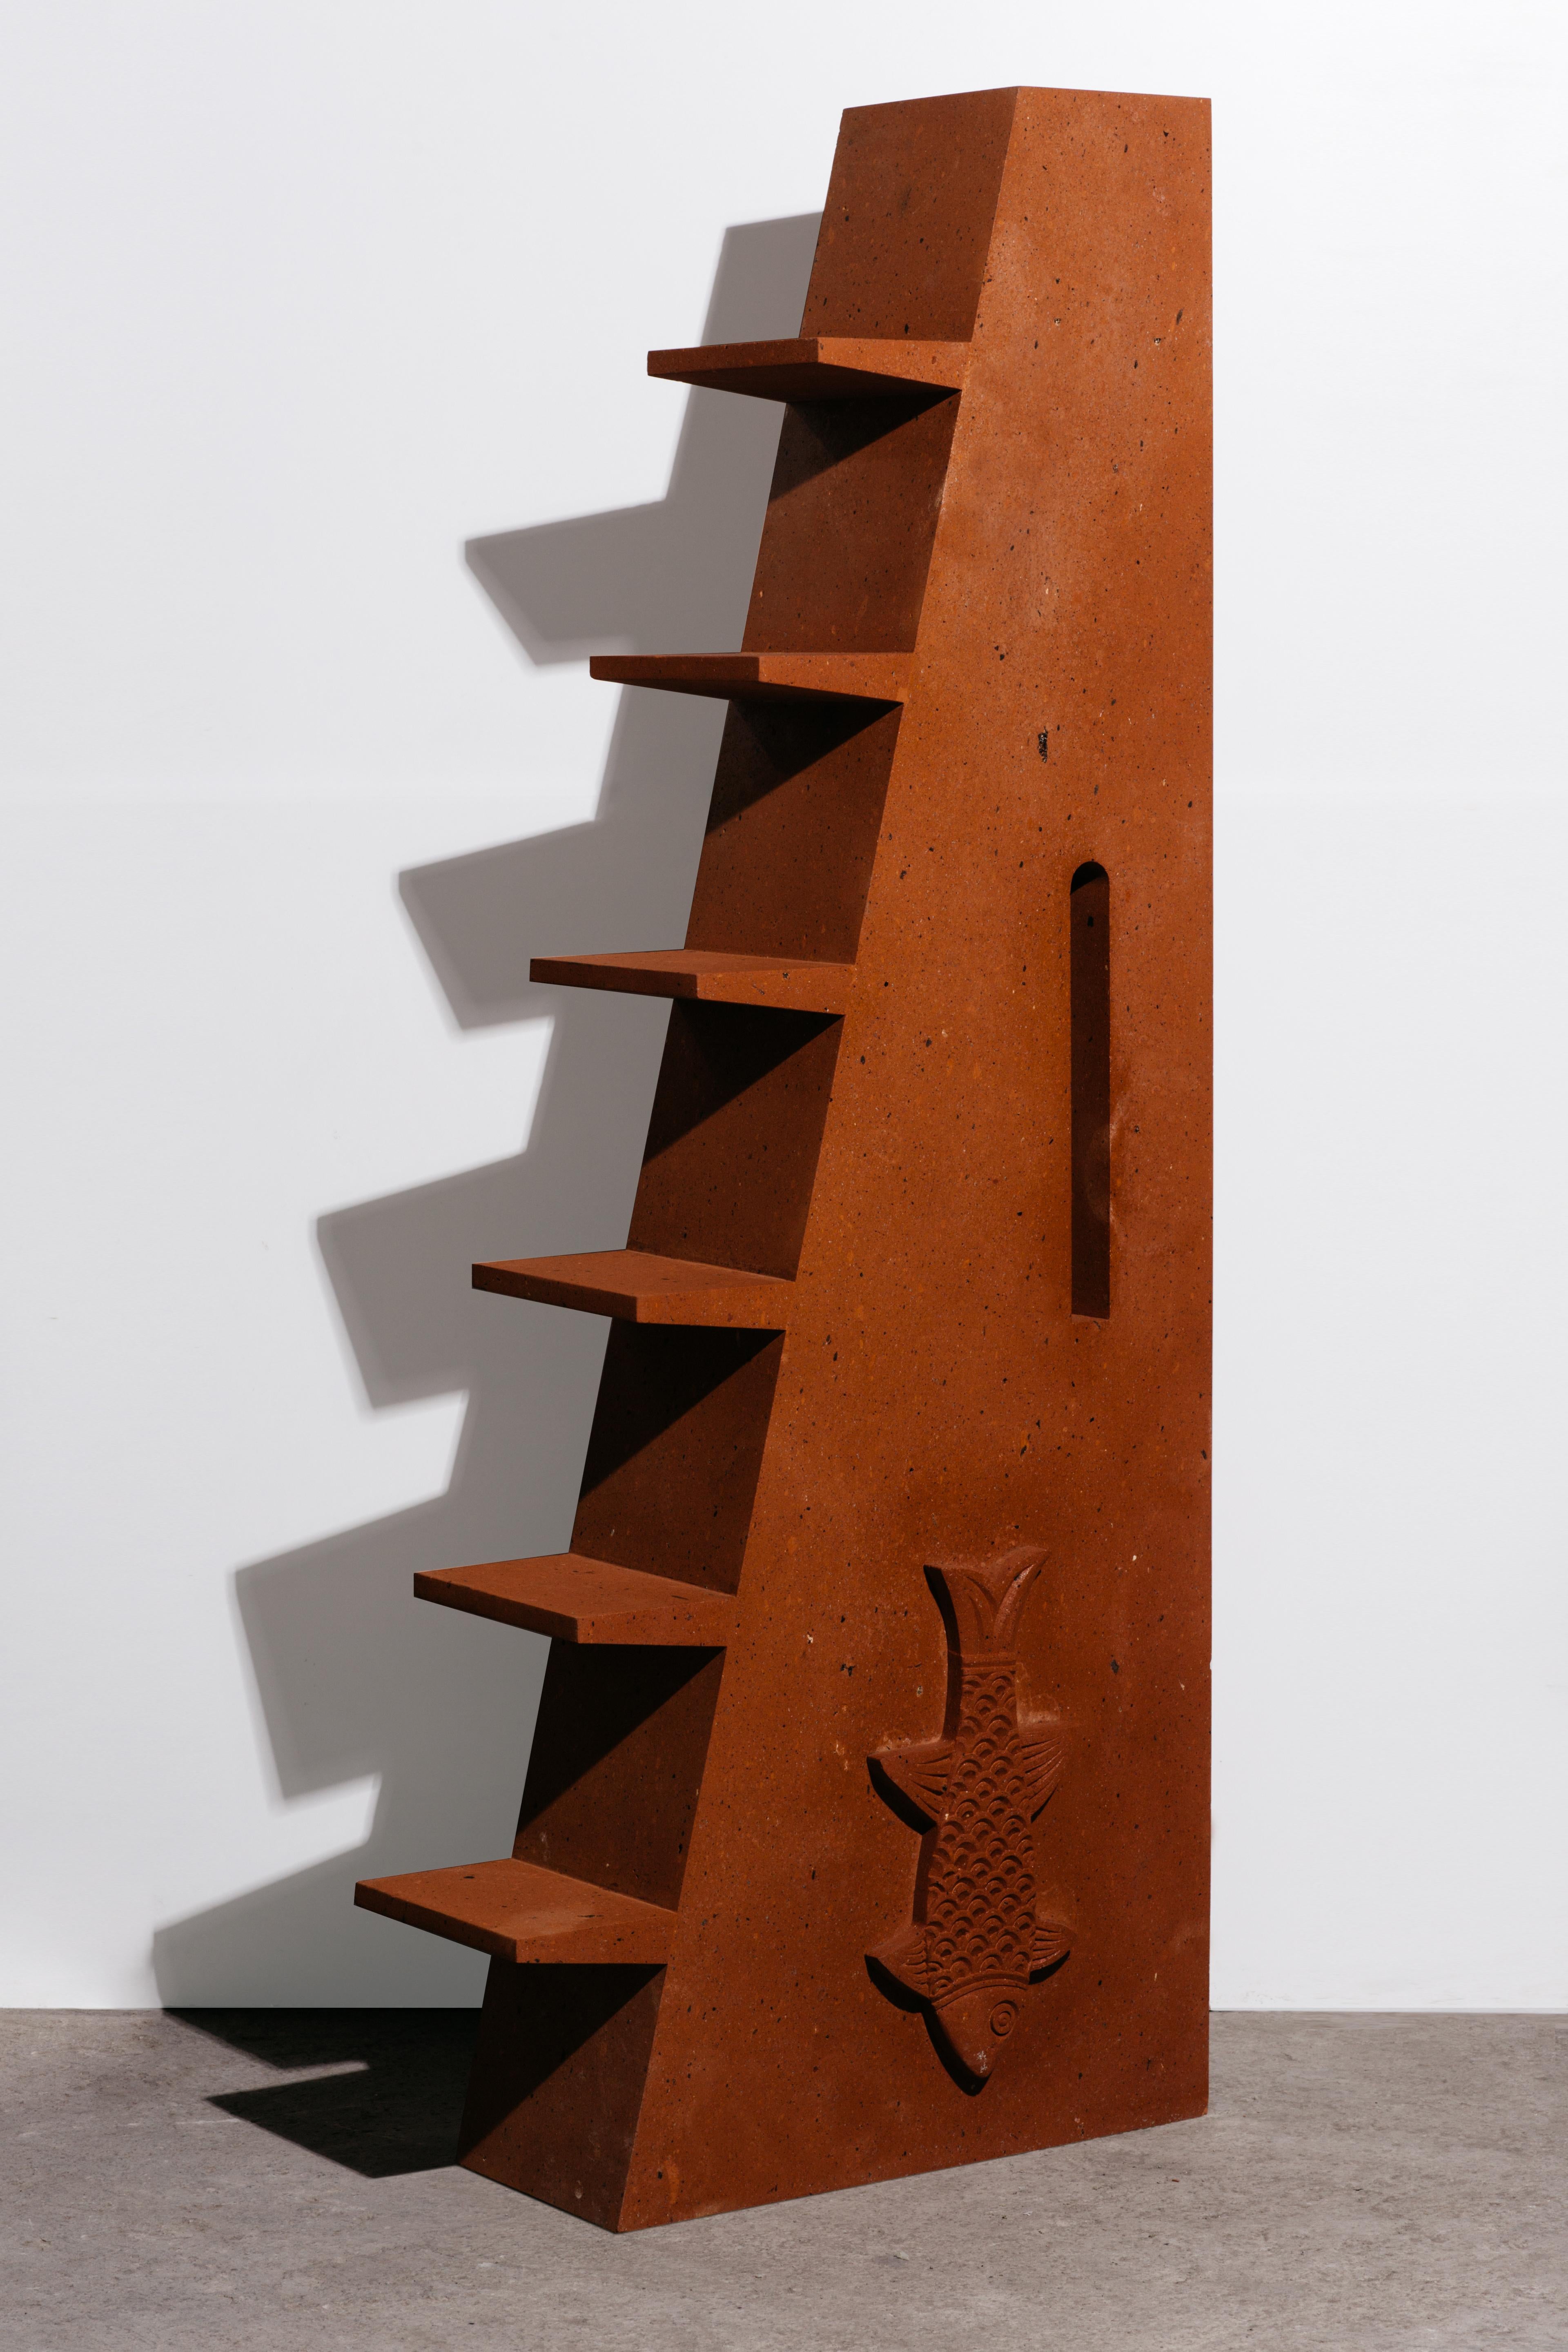 The Source Tall Shelf No.2 by A Space
Dimensions: D60 x W25 x H170cm
Materials: Red tuff.
Weight: 230 kg

Inspired by antiquity, material, craftsmanship and architecture of Armenia, this collection consists of 12 limited edition objects, each